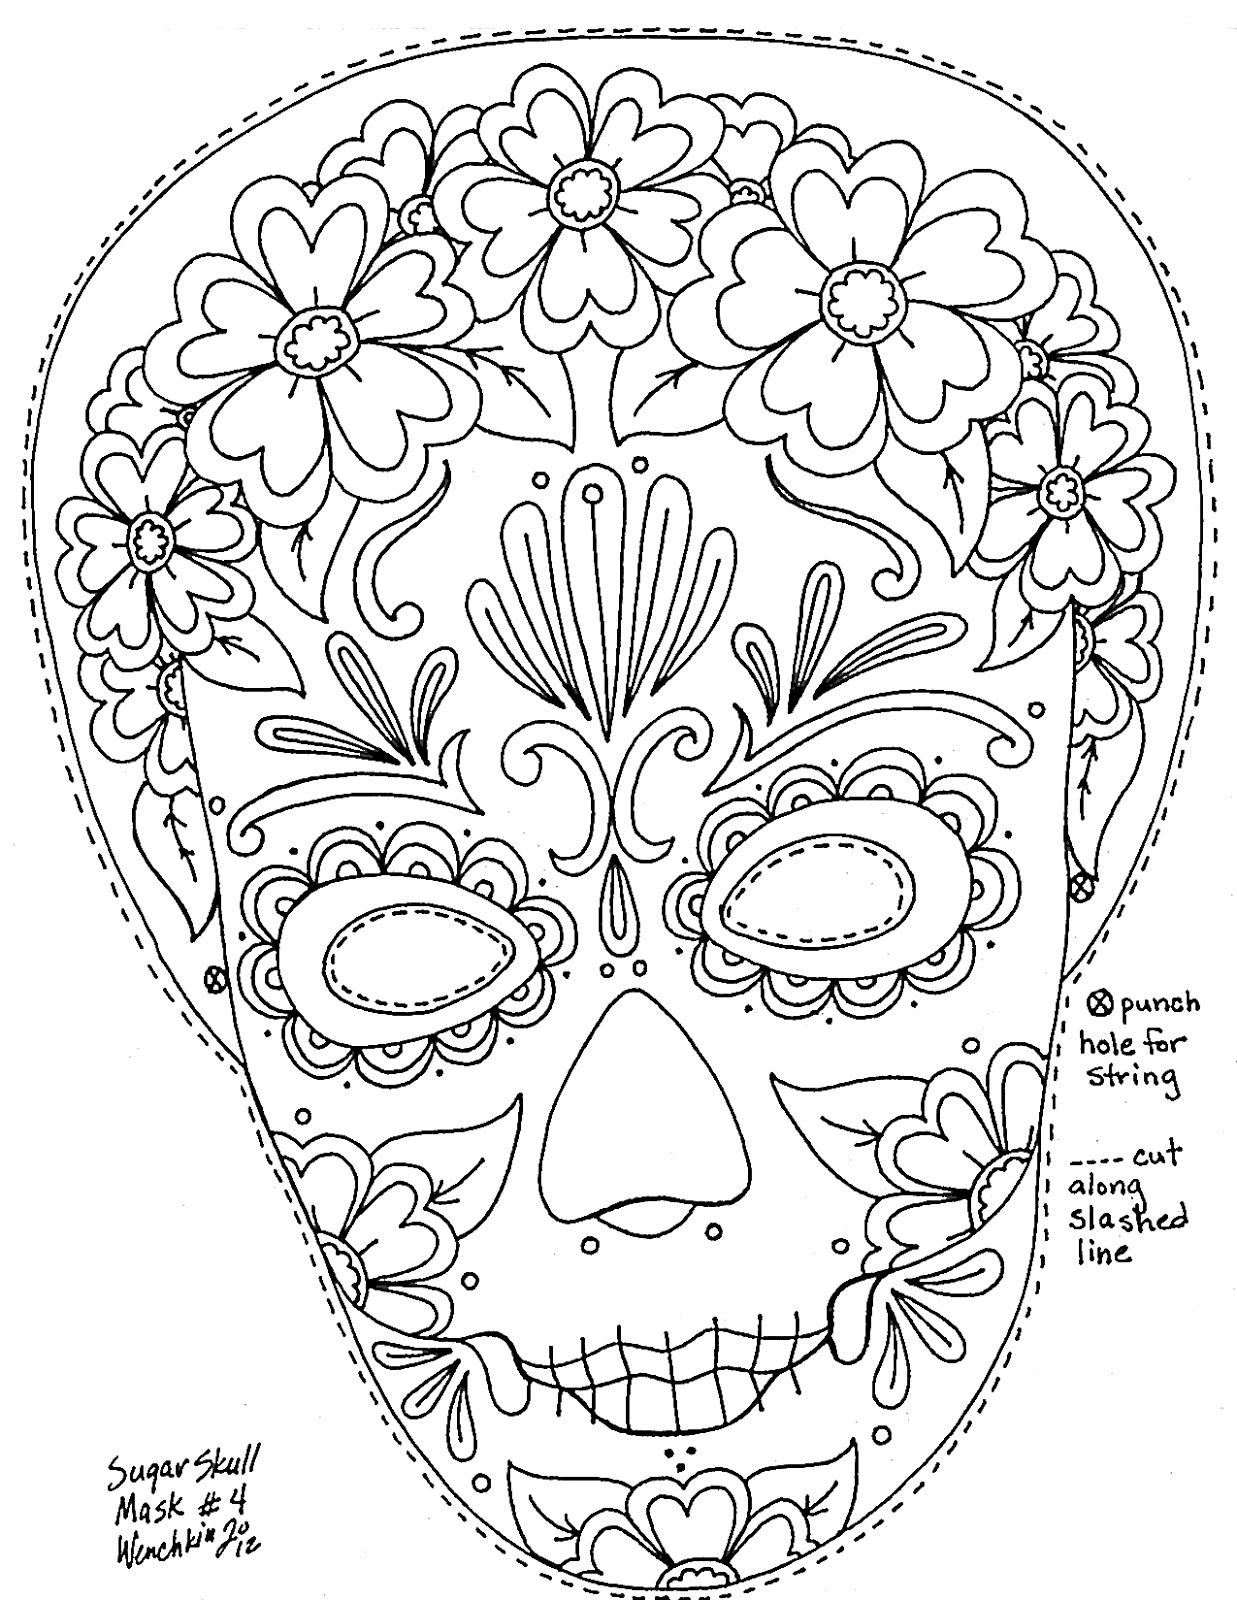 candy skull coloring pages yucca flats nm october 2012 skull pages coloring candy 